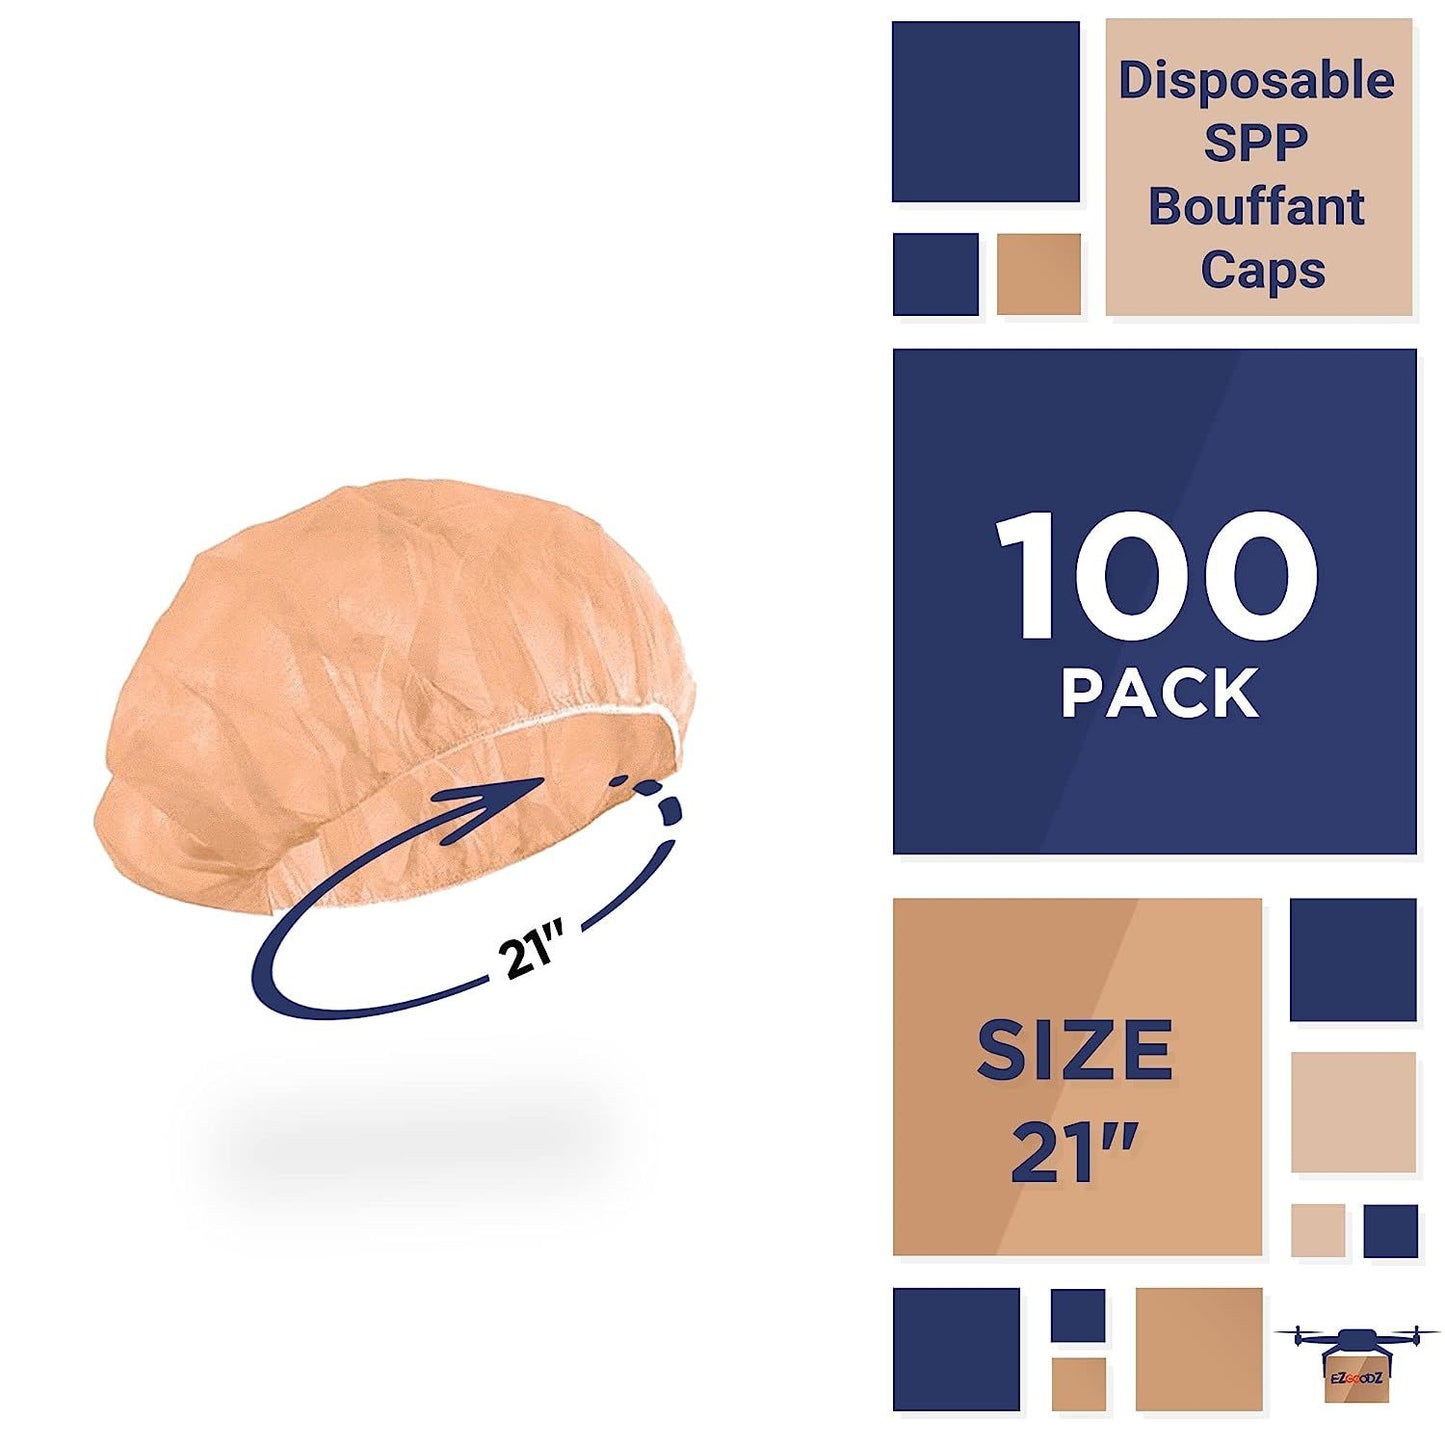 Disposable Hair Caps for Nurses 21'', Pack of 100 Orange Bouffant Caps Disposable with Elastic Edge, Polypropylene Bouffant Hair Nets, Hairnets for Women Food Service, Cleaning Industry